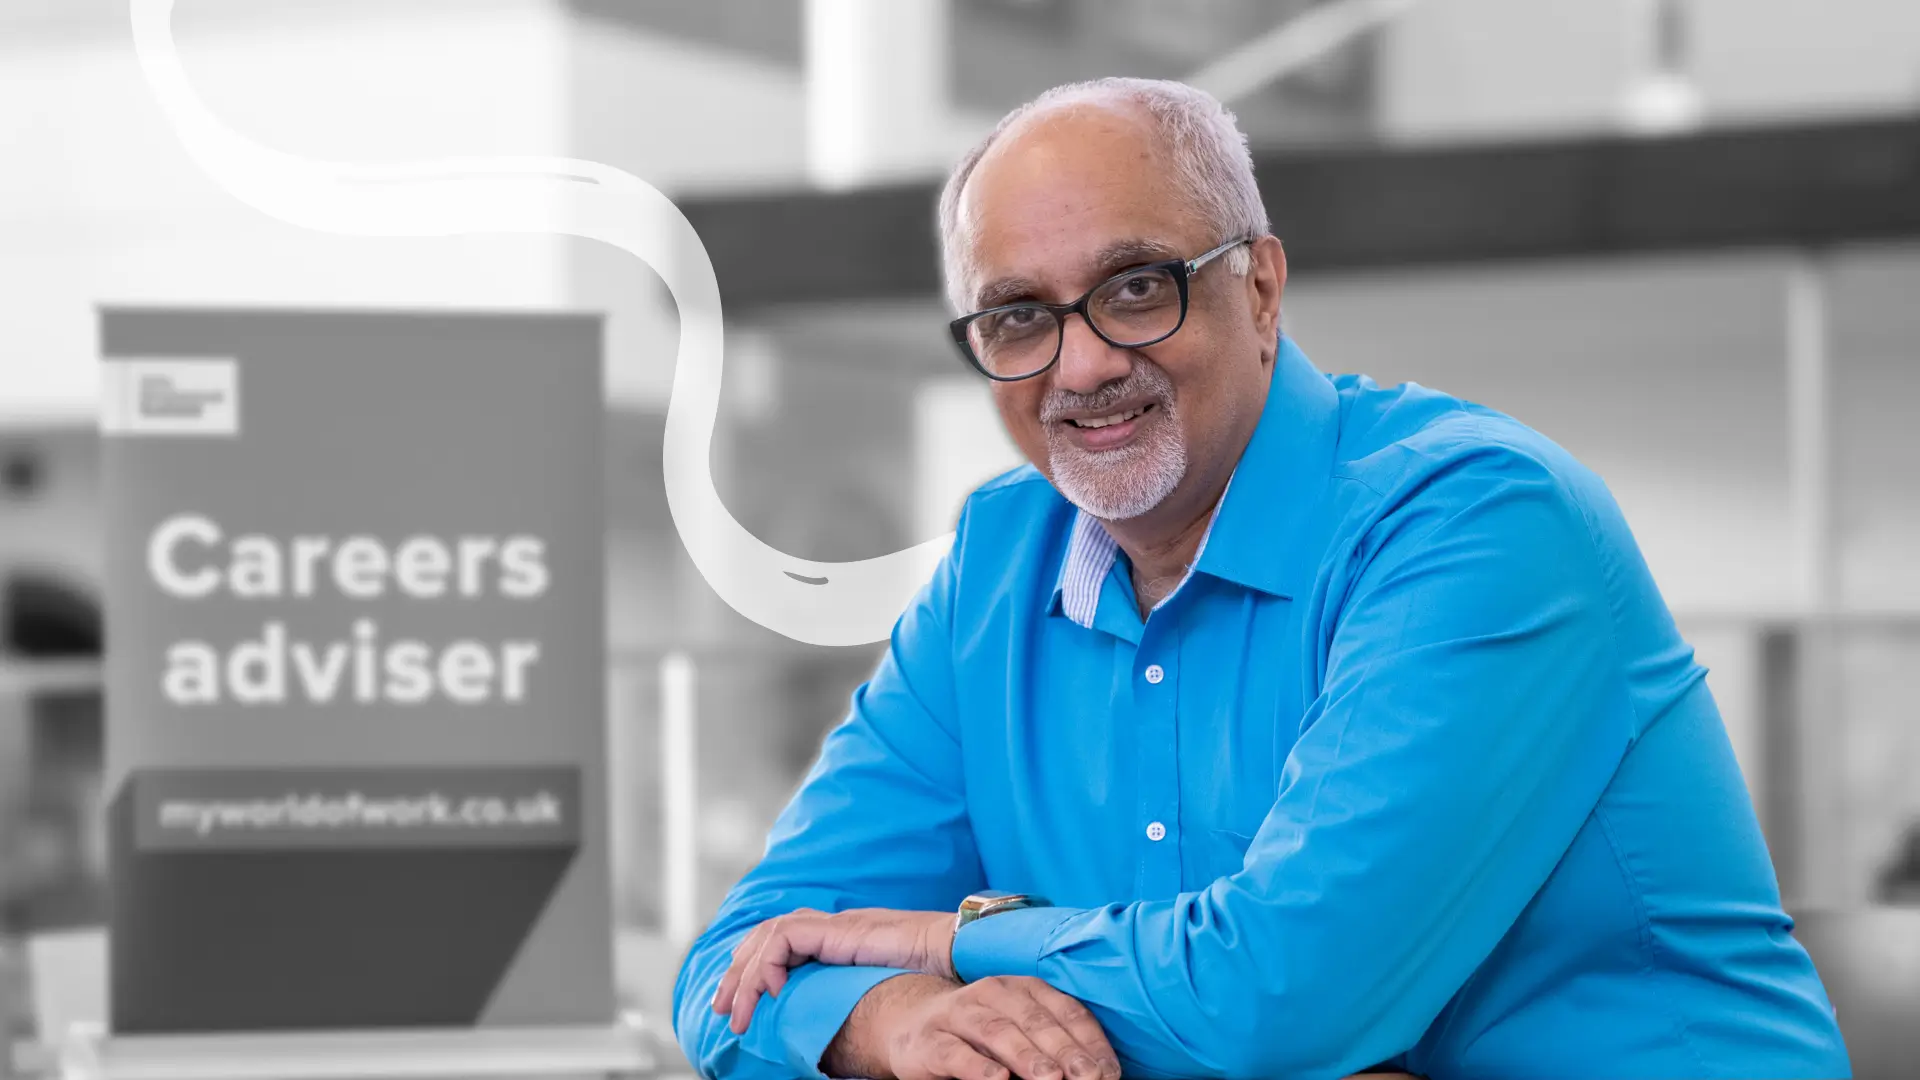 Smiling man in office next to sign reading 'Careers adviser'